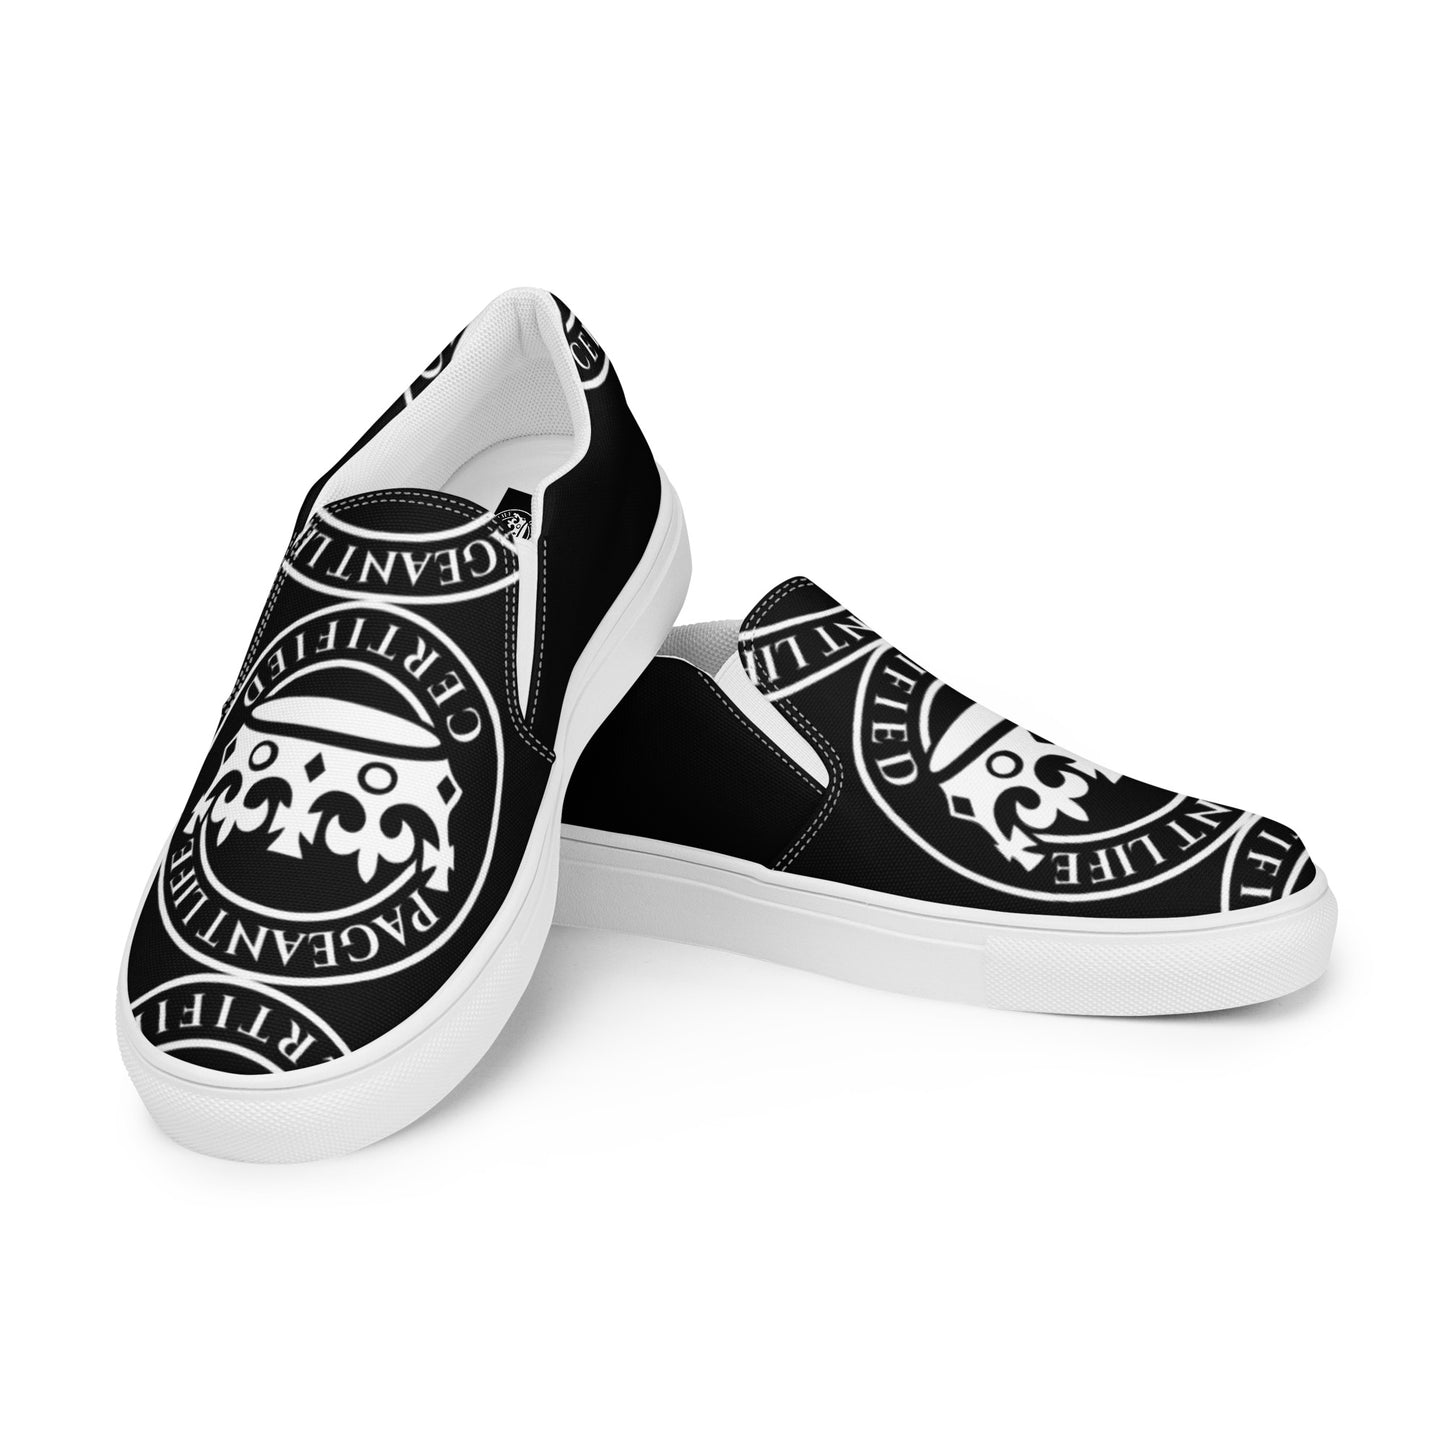 Black and White Pageant Life Certified Women’s slip-on canvas shoes